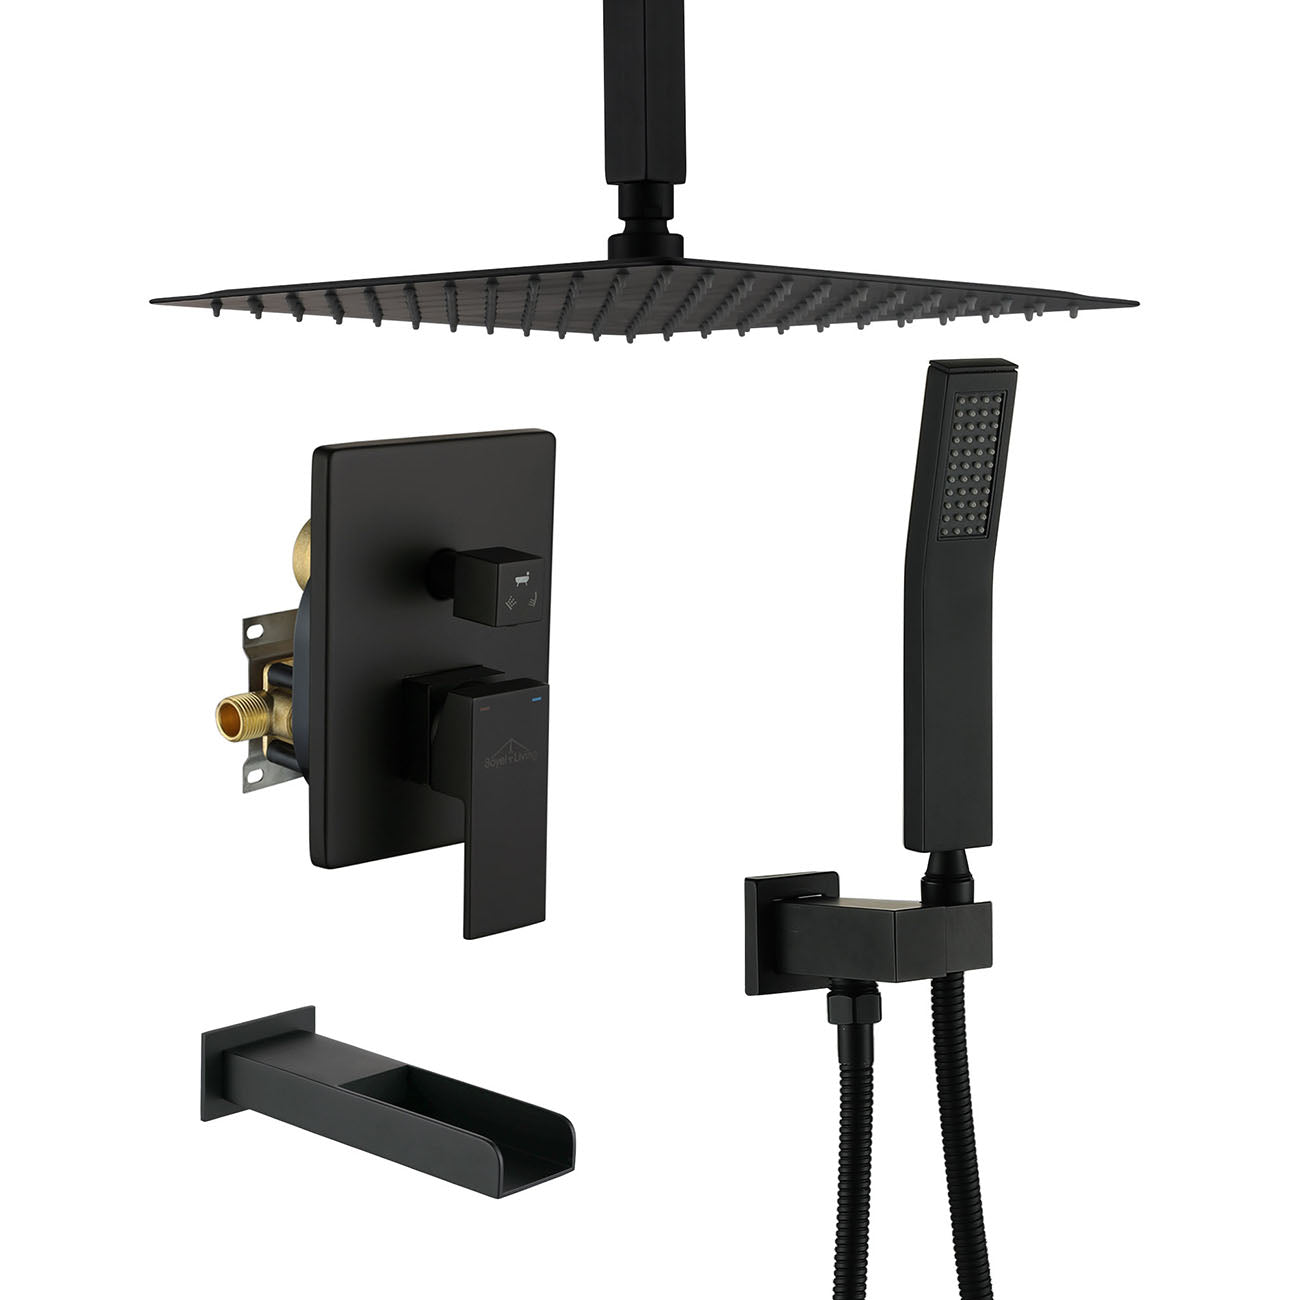 Boyel Living 12 in. Ceiling Mounted Rain Shower System with Tub Faucet in Matte Black